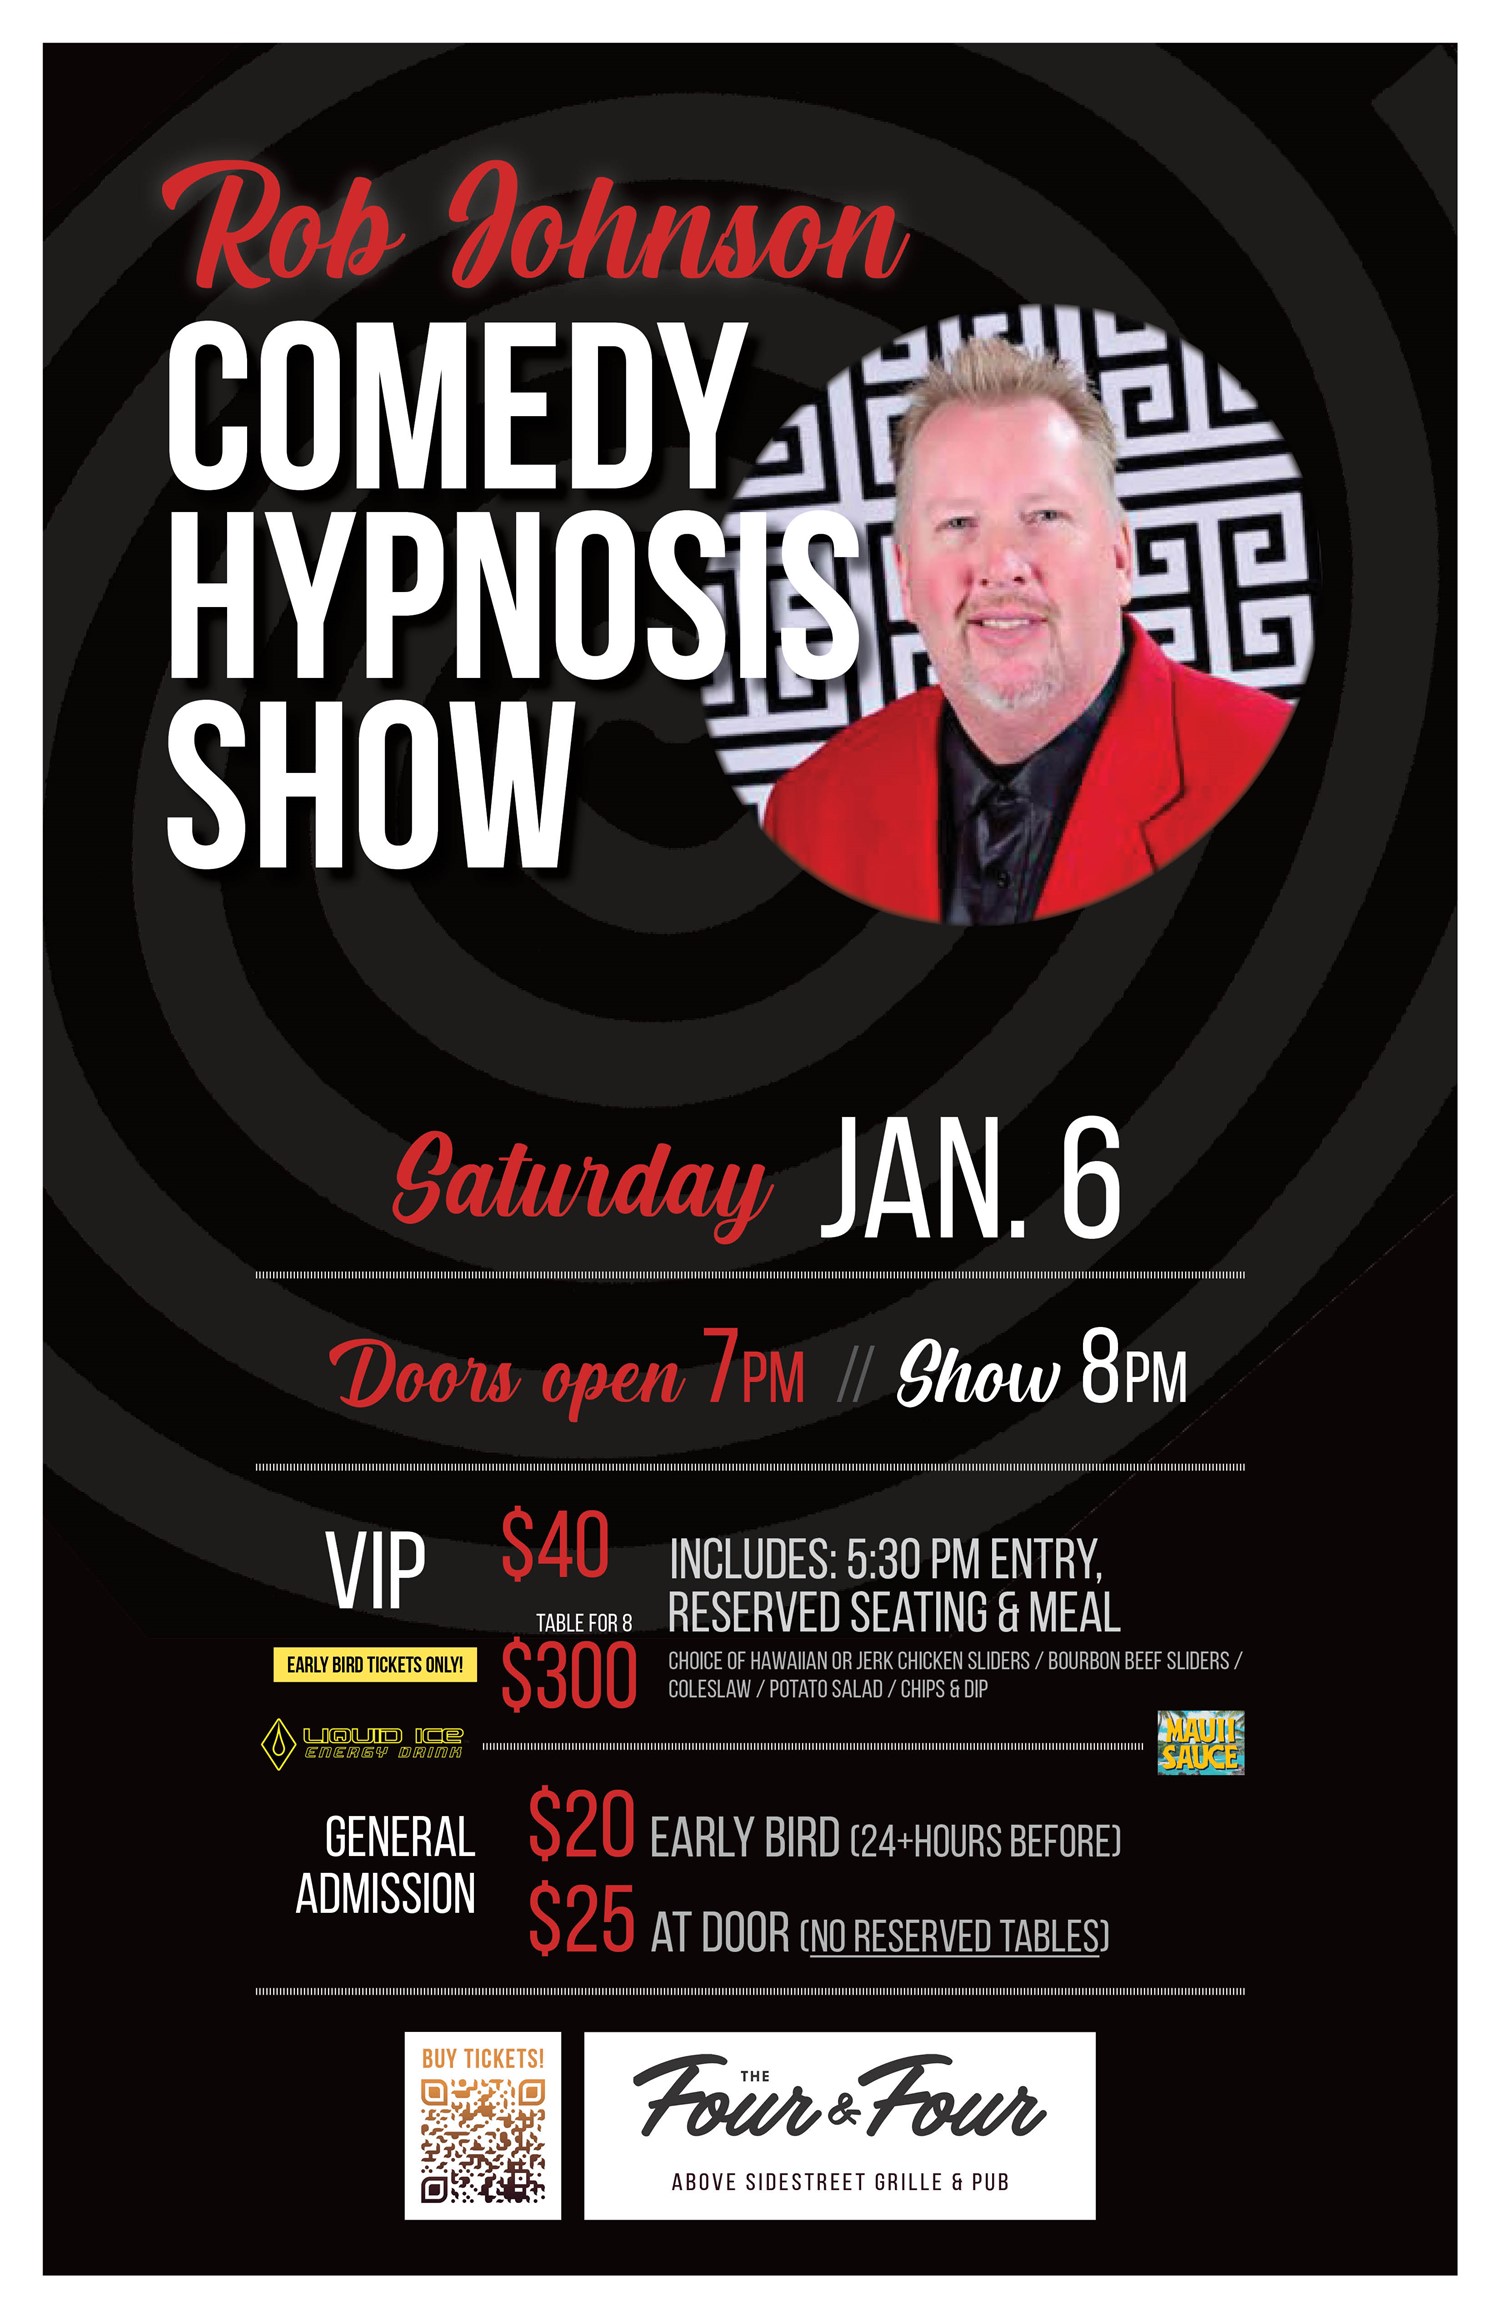 Rob Johnson Comedy Hypnosis Show  on Jan 06, 20:00@The Four and Four, above Sidestreet Grille & Bar - Buy tickets and Get information on Sidestreet Live / Four and Four 